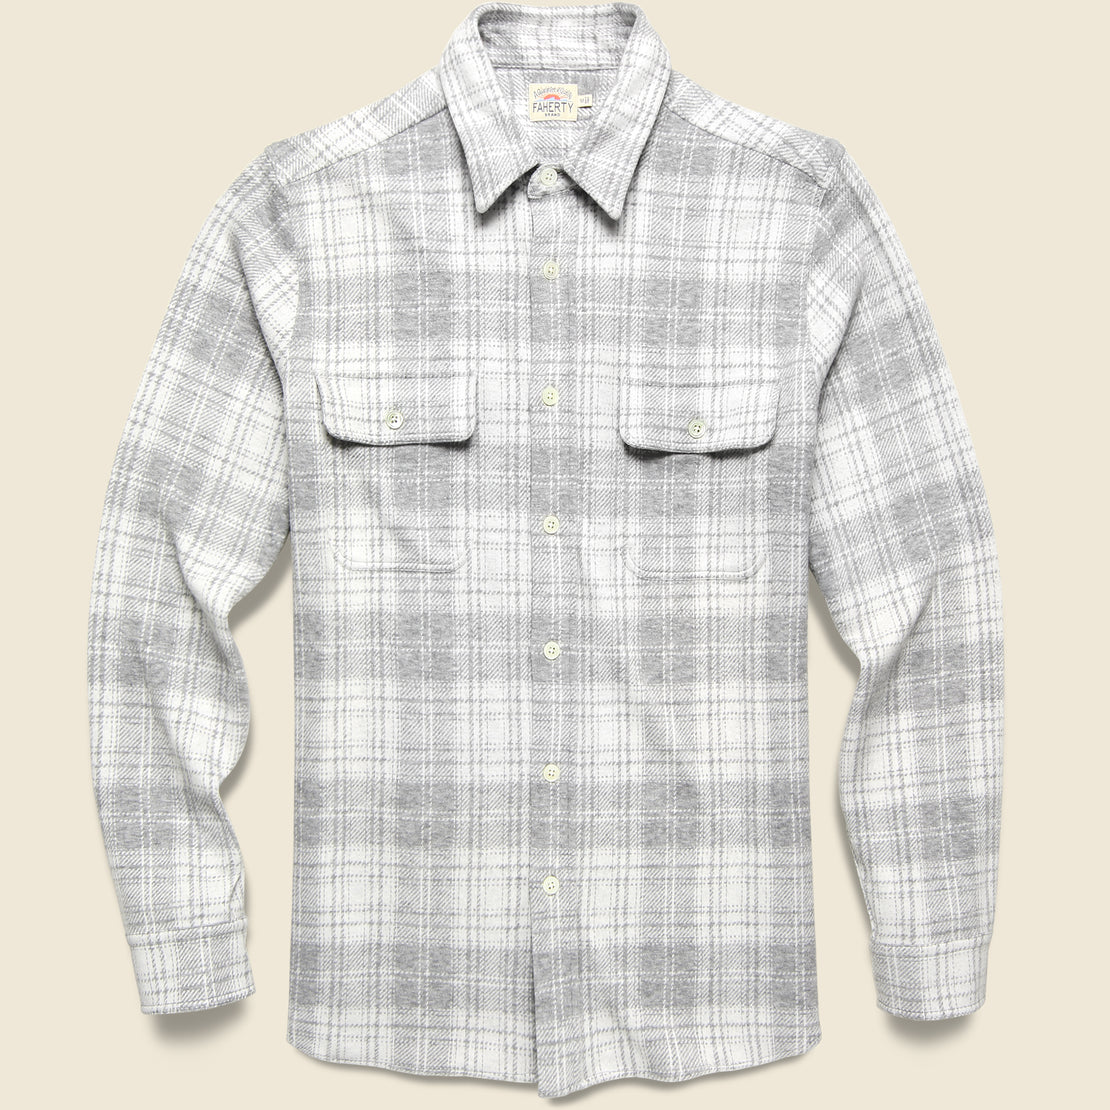 Faherty Legend Sweater Shirt - Winter Clouds Plaid